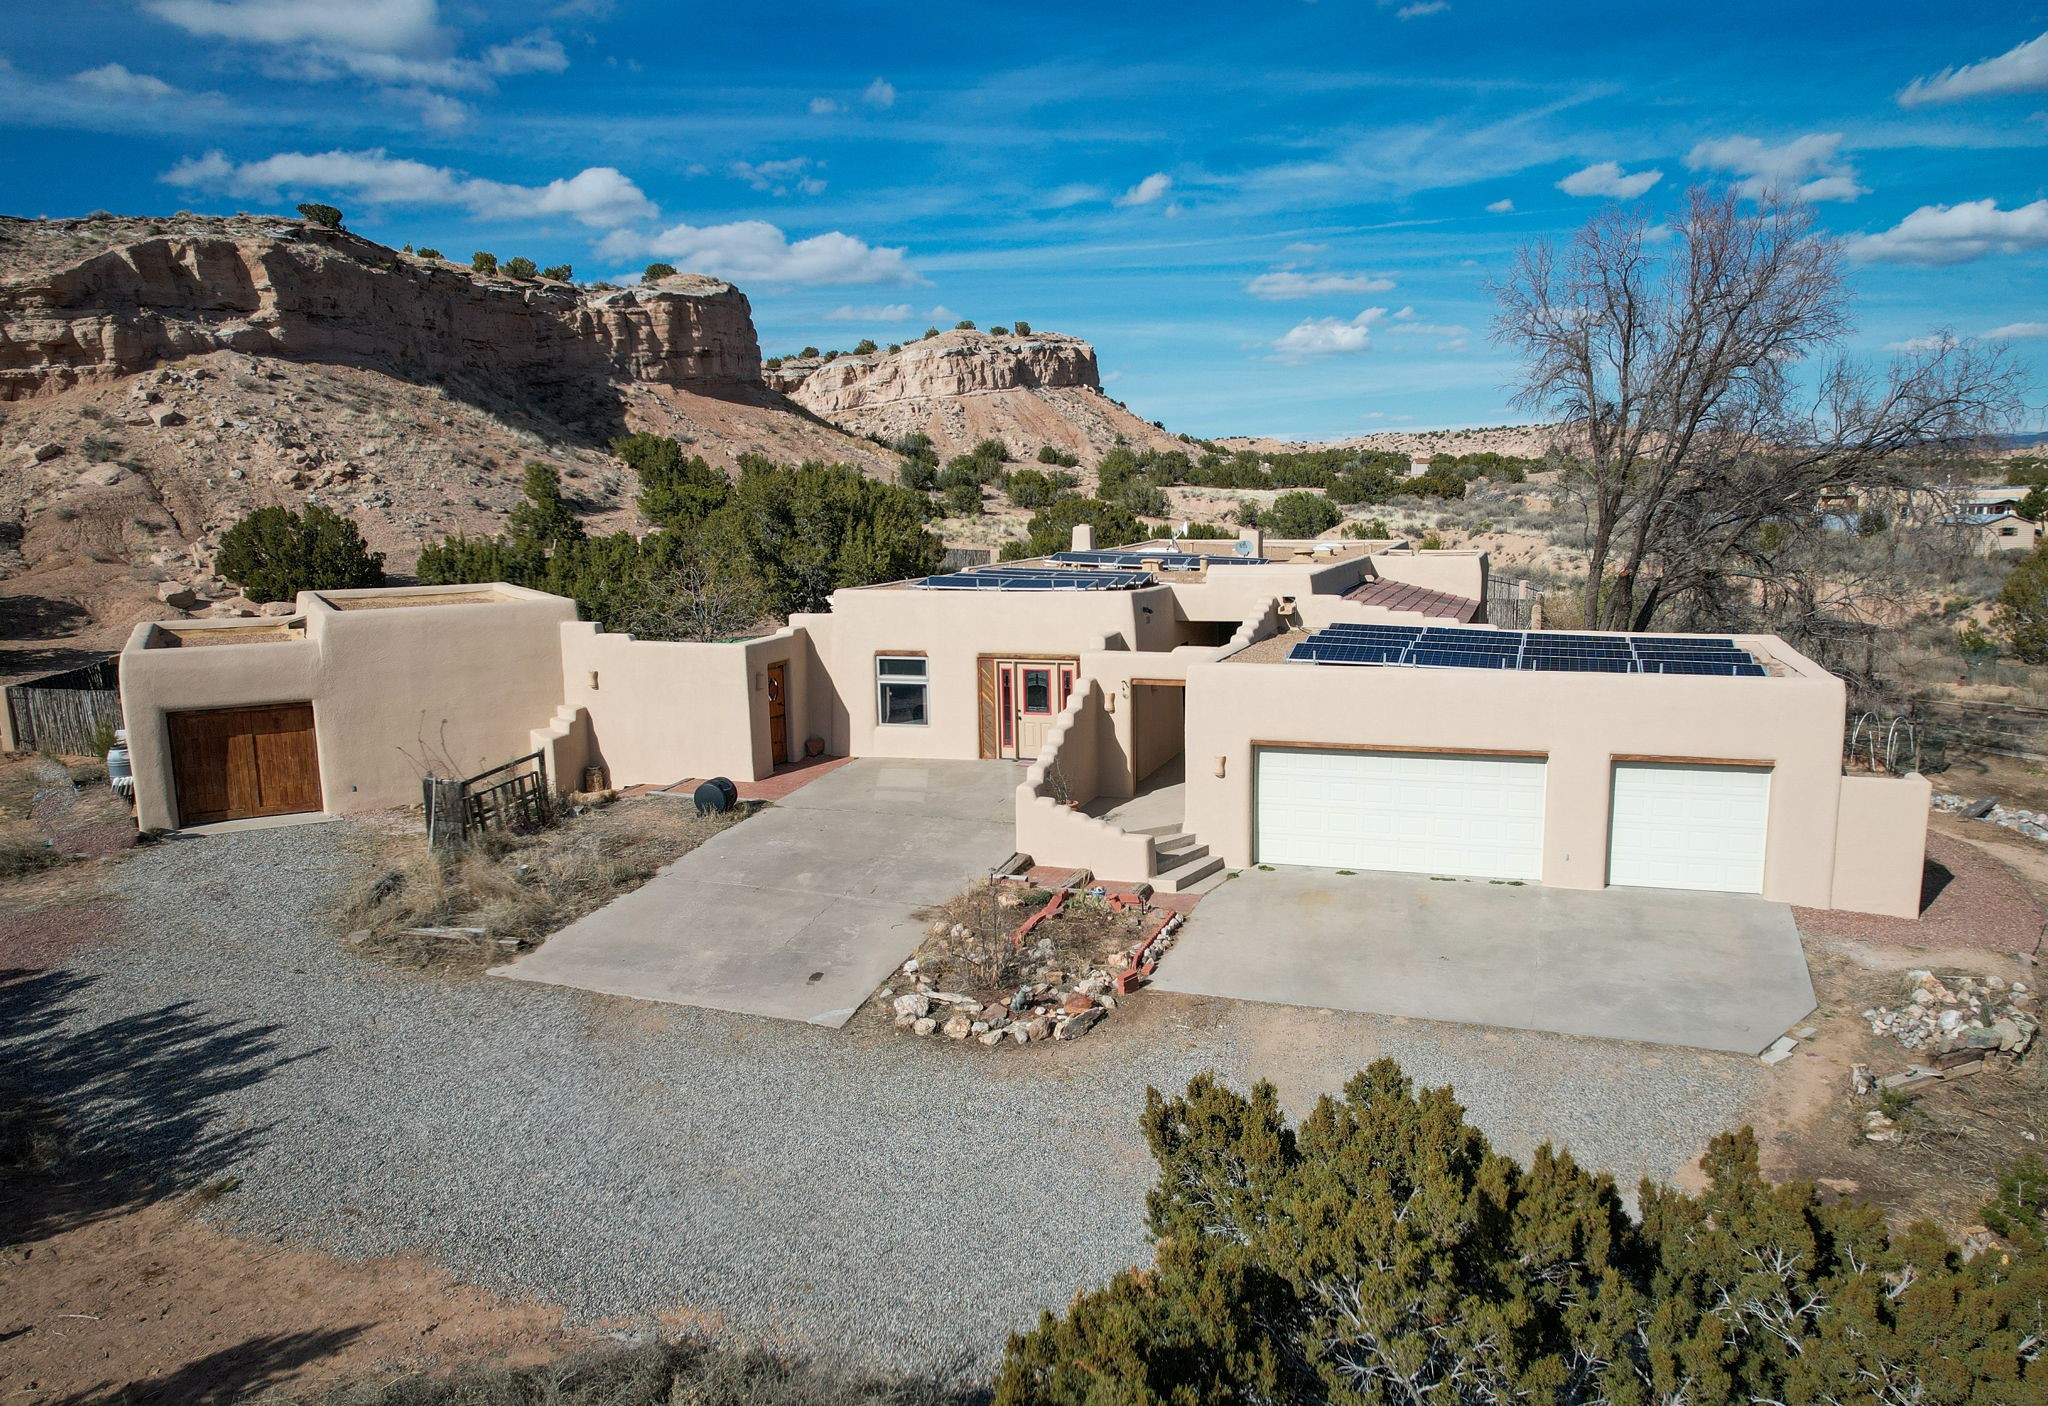 189 Thankhohay Poe, Santa Fe, New Mexico 87506, 2 Bedrooms Bedrooms, ,3 BathroomsBathrooms,Residential,For Sale,189 Thankhohay Poe,202335227